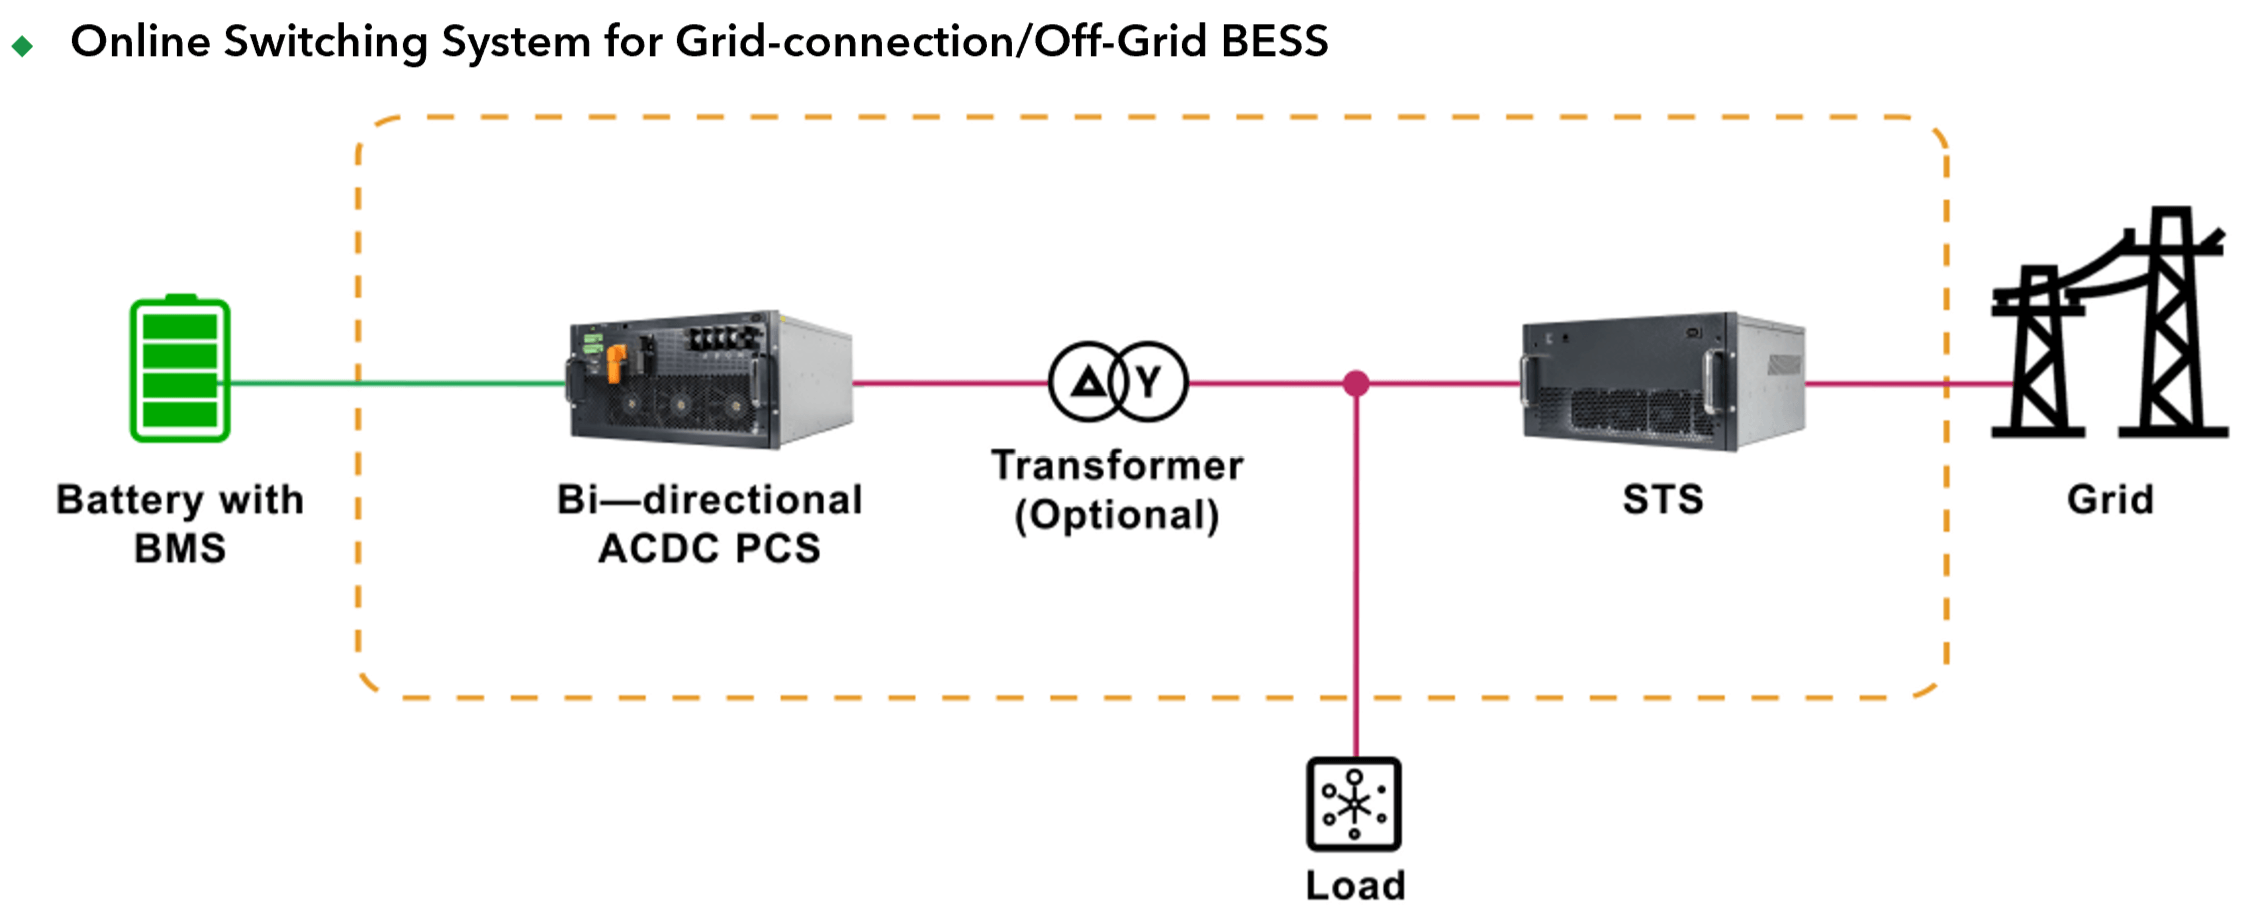 Online Switching System for Grid-connection/Off-Grid BESS